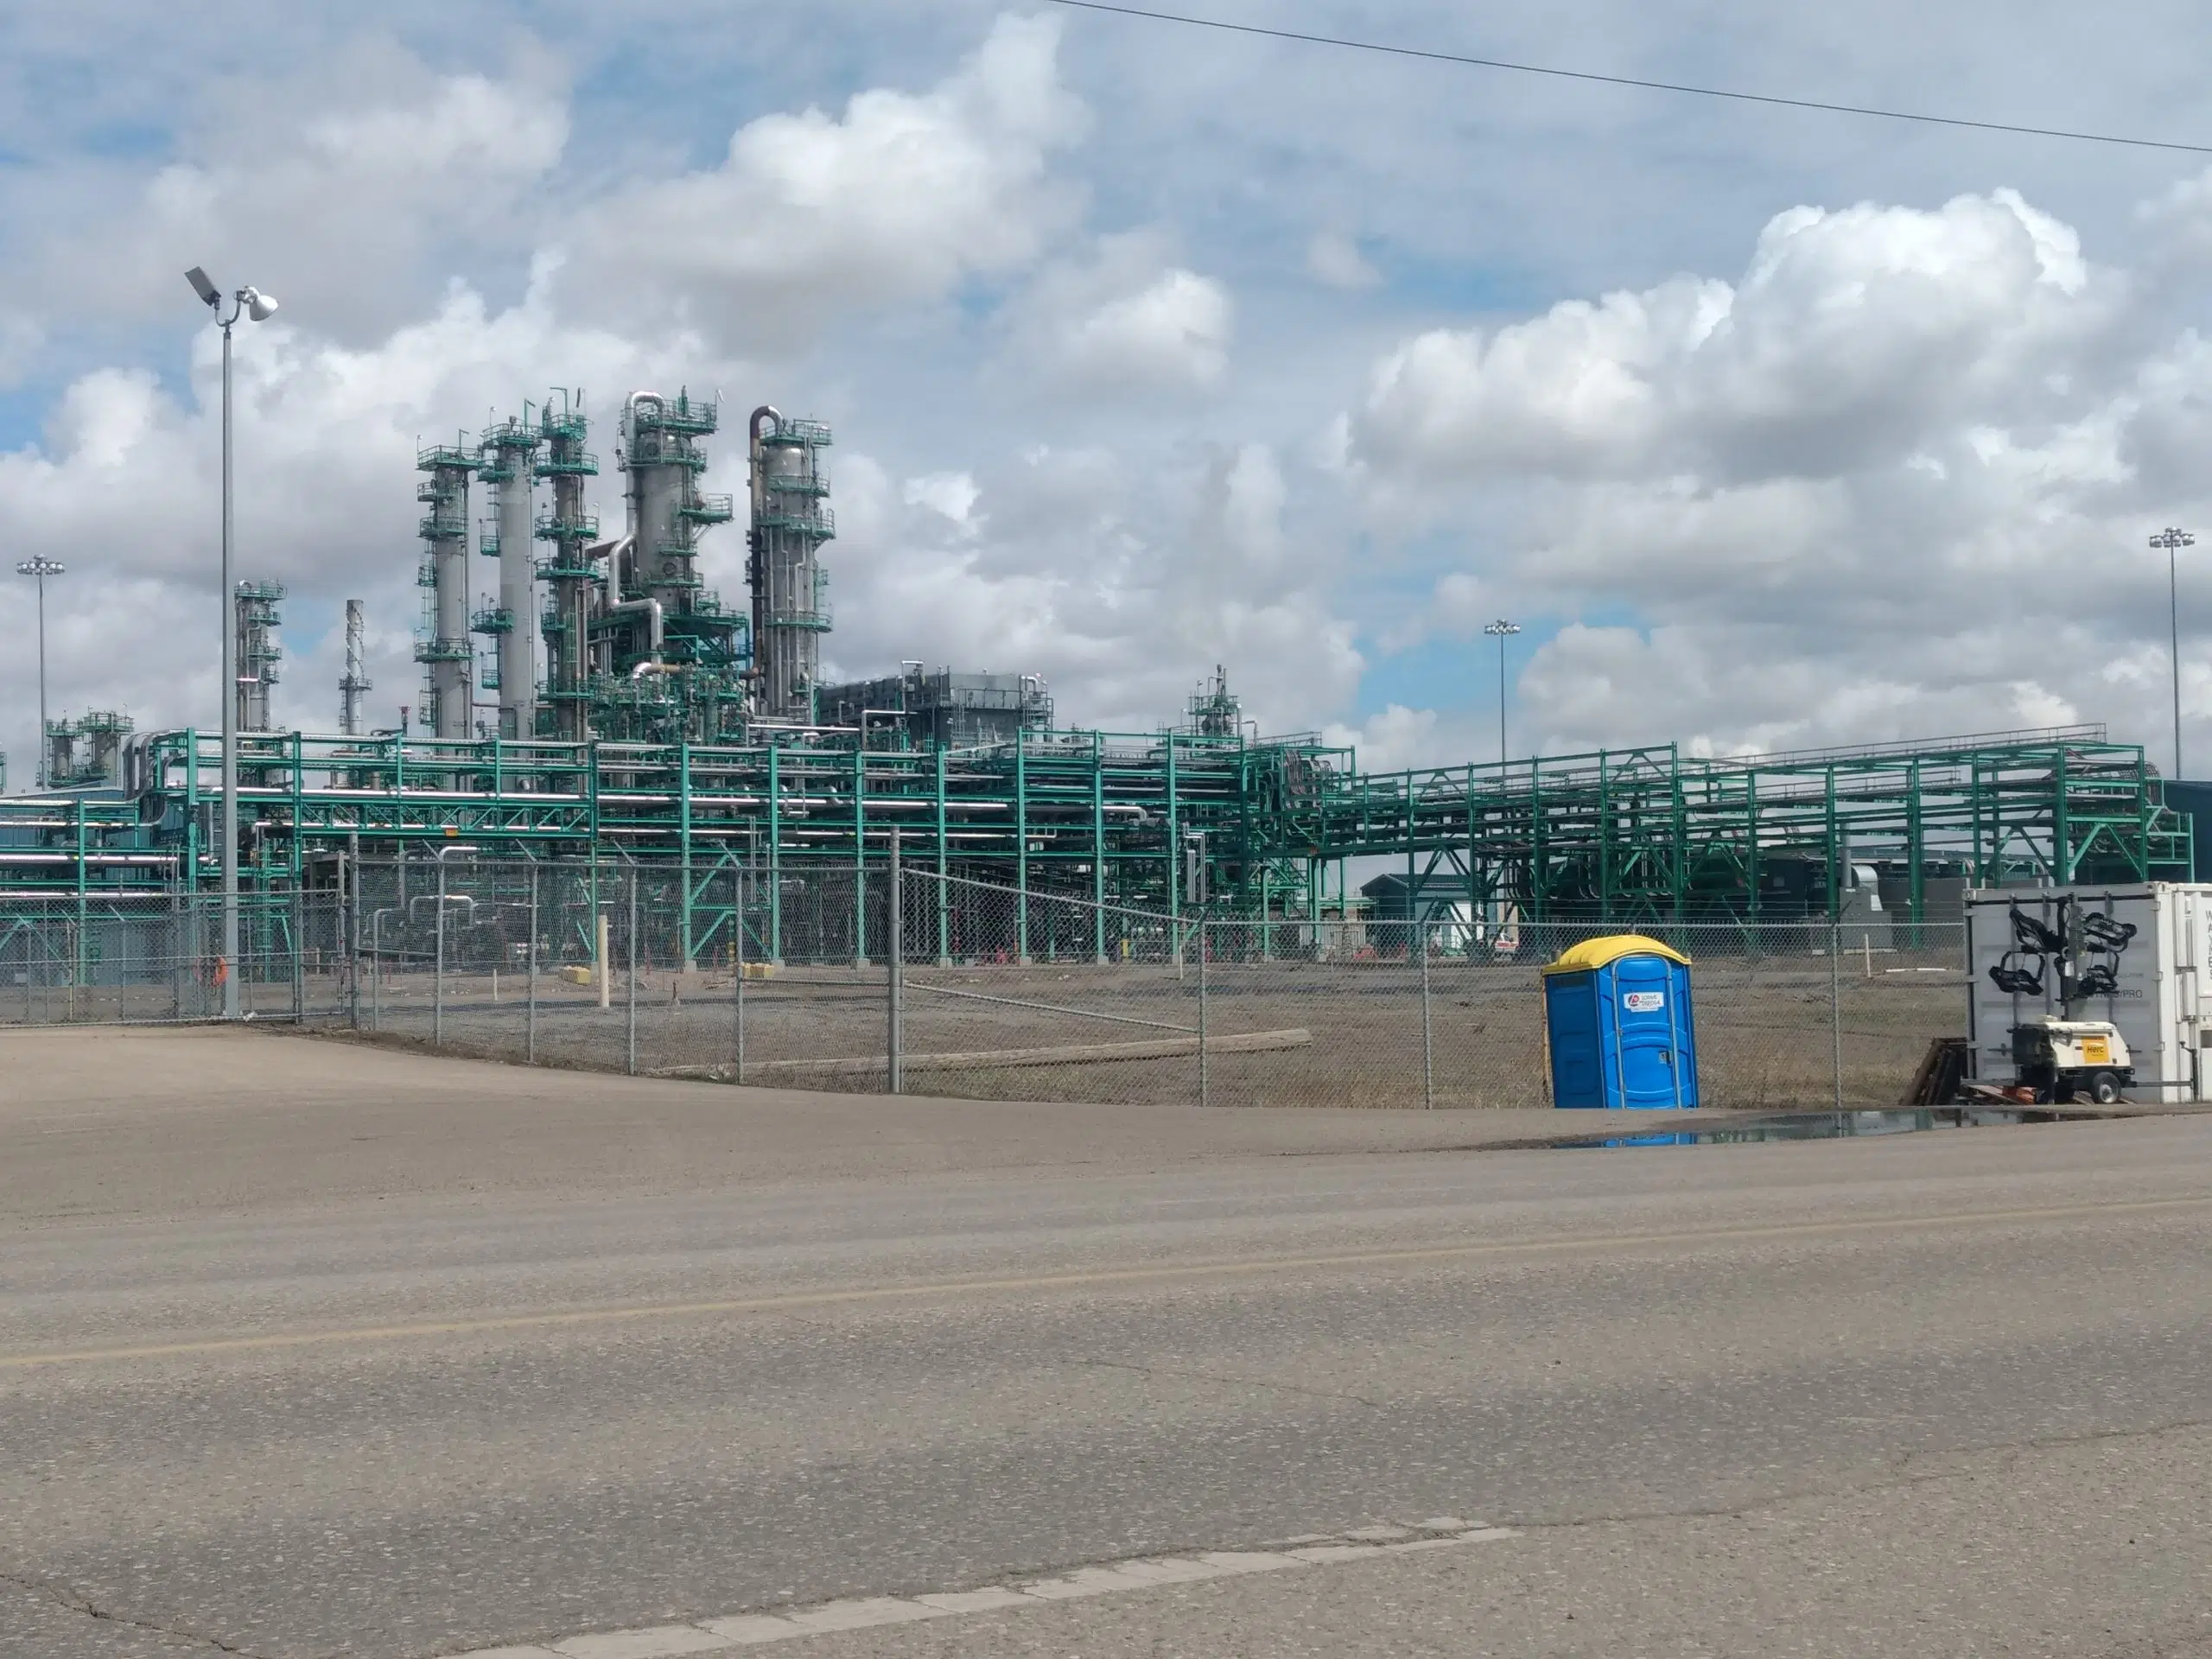 Oil spill posed no risk to public or environment, Co-op refinery says